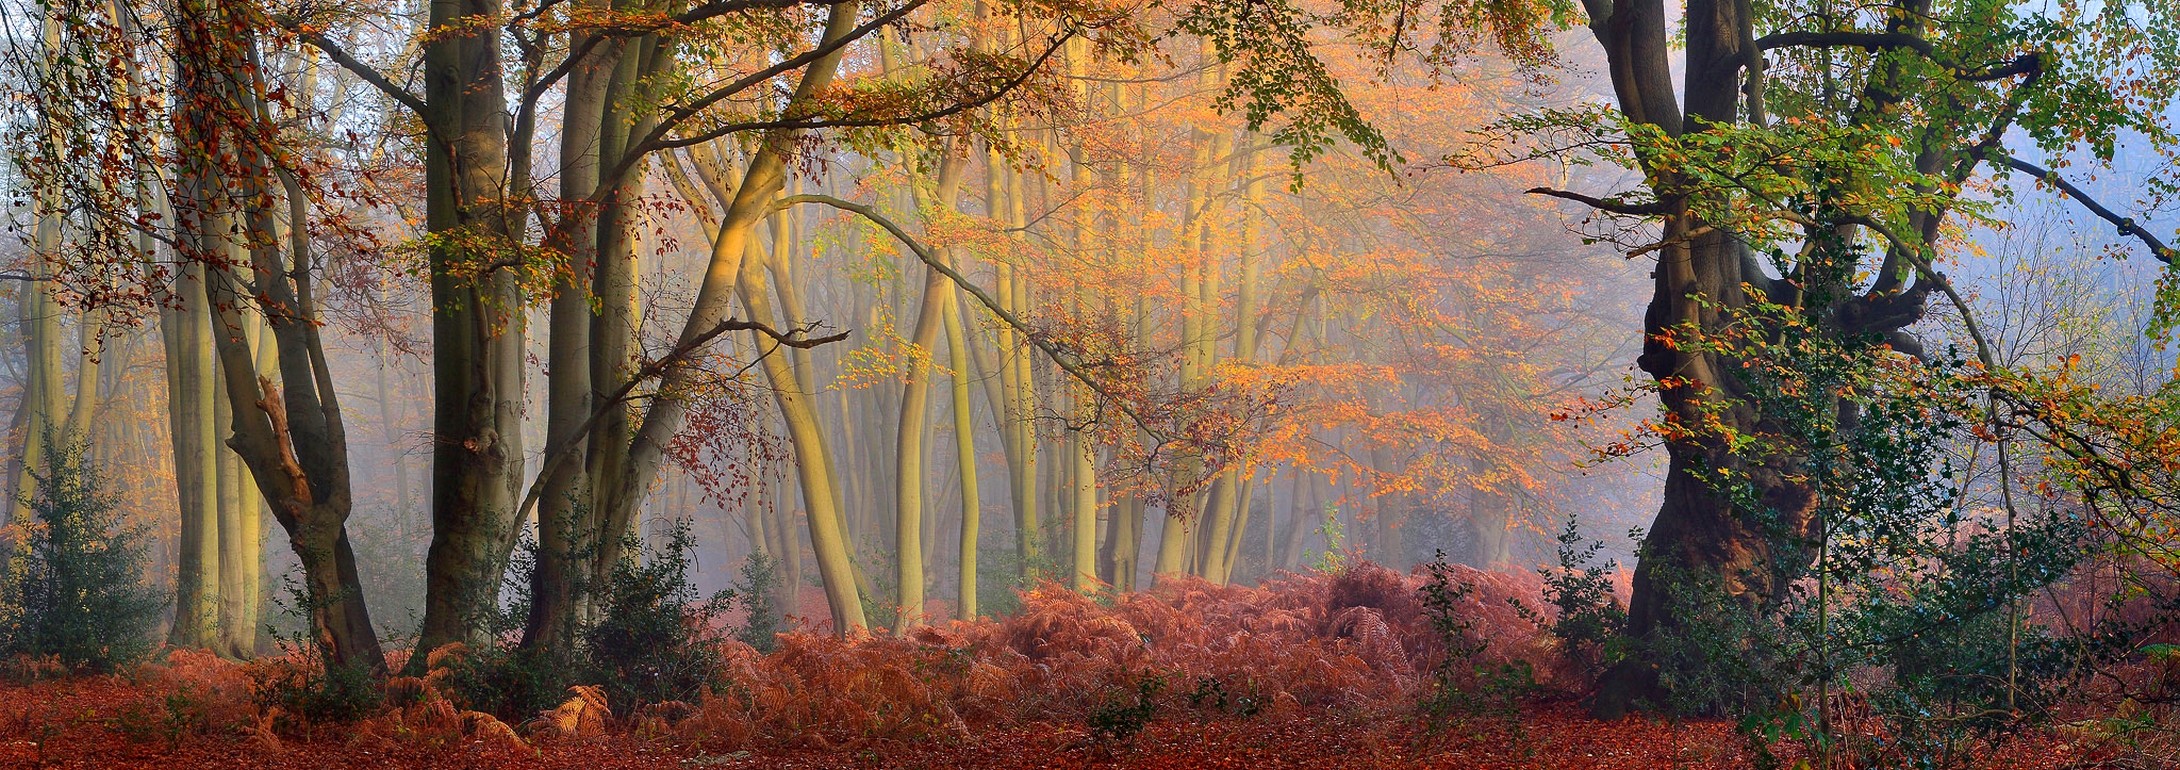 mist, Forest, Fall, Trees, Sun Rays, Morning, Shrubs, Panoramas, Nature, Landscape Wallpaper